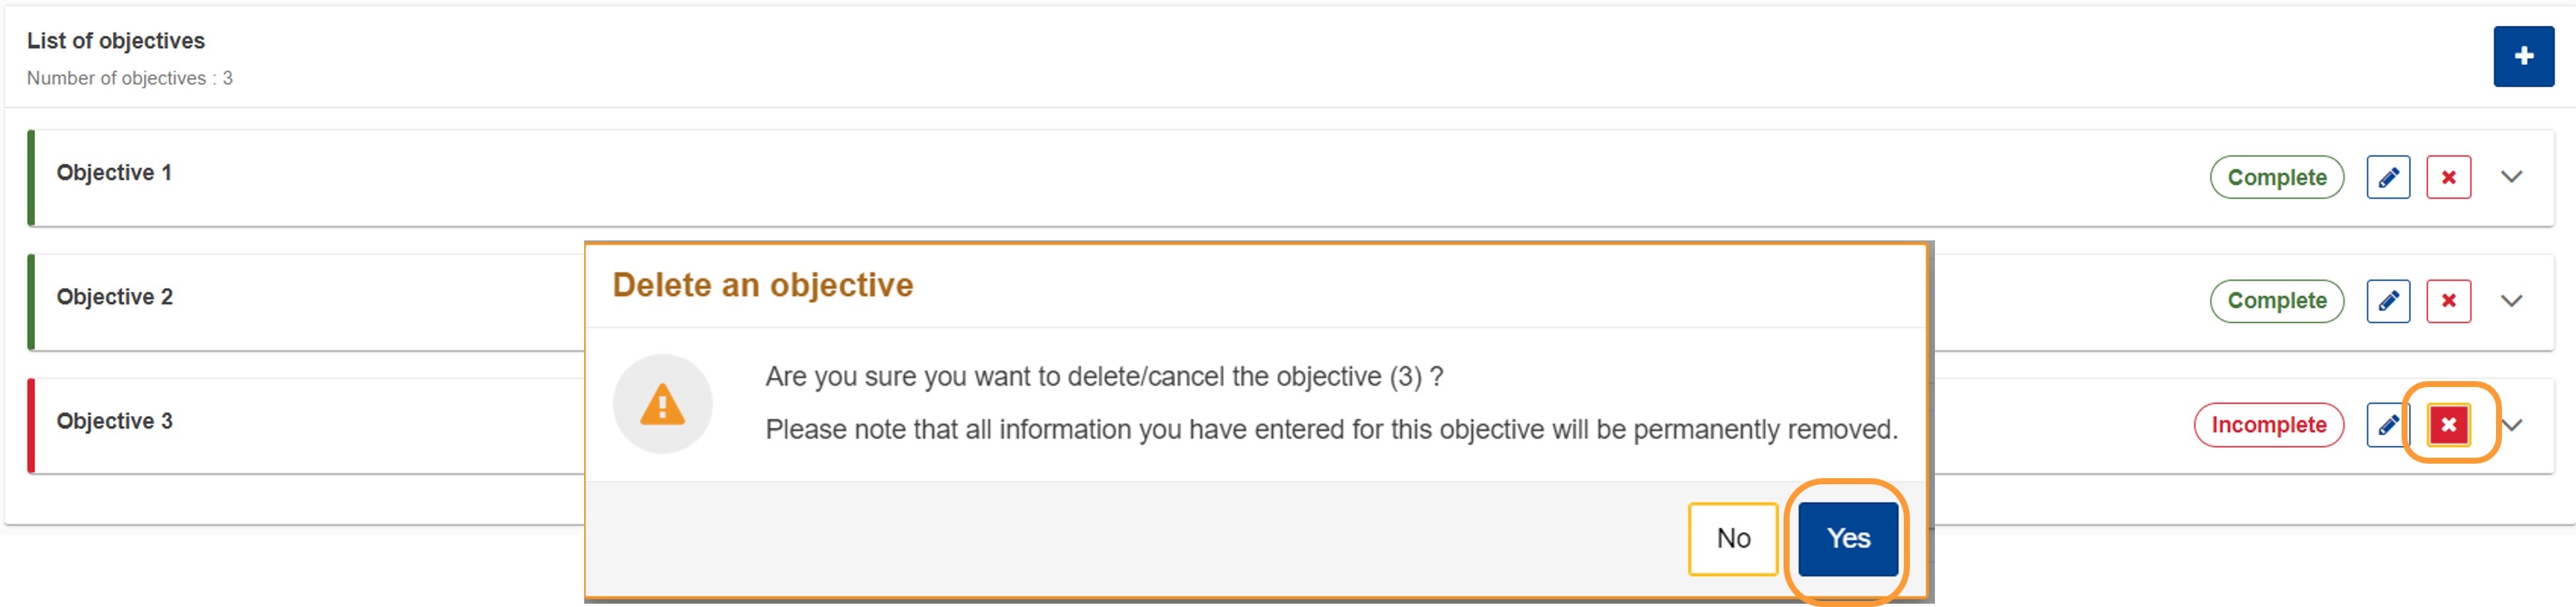 Deleting an objective